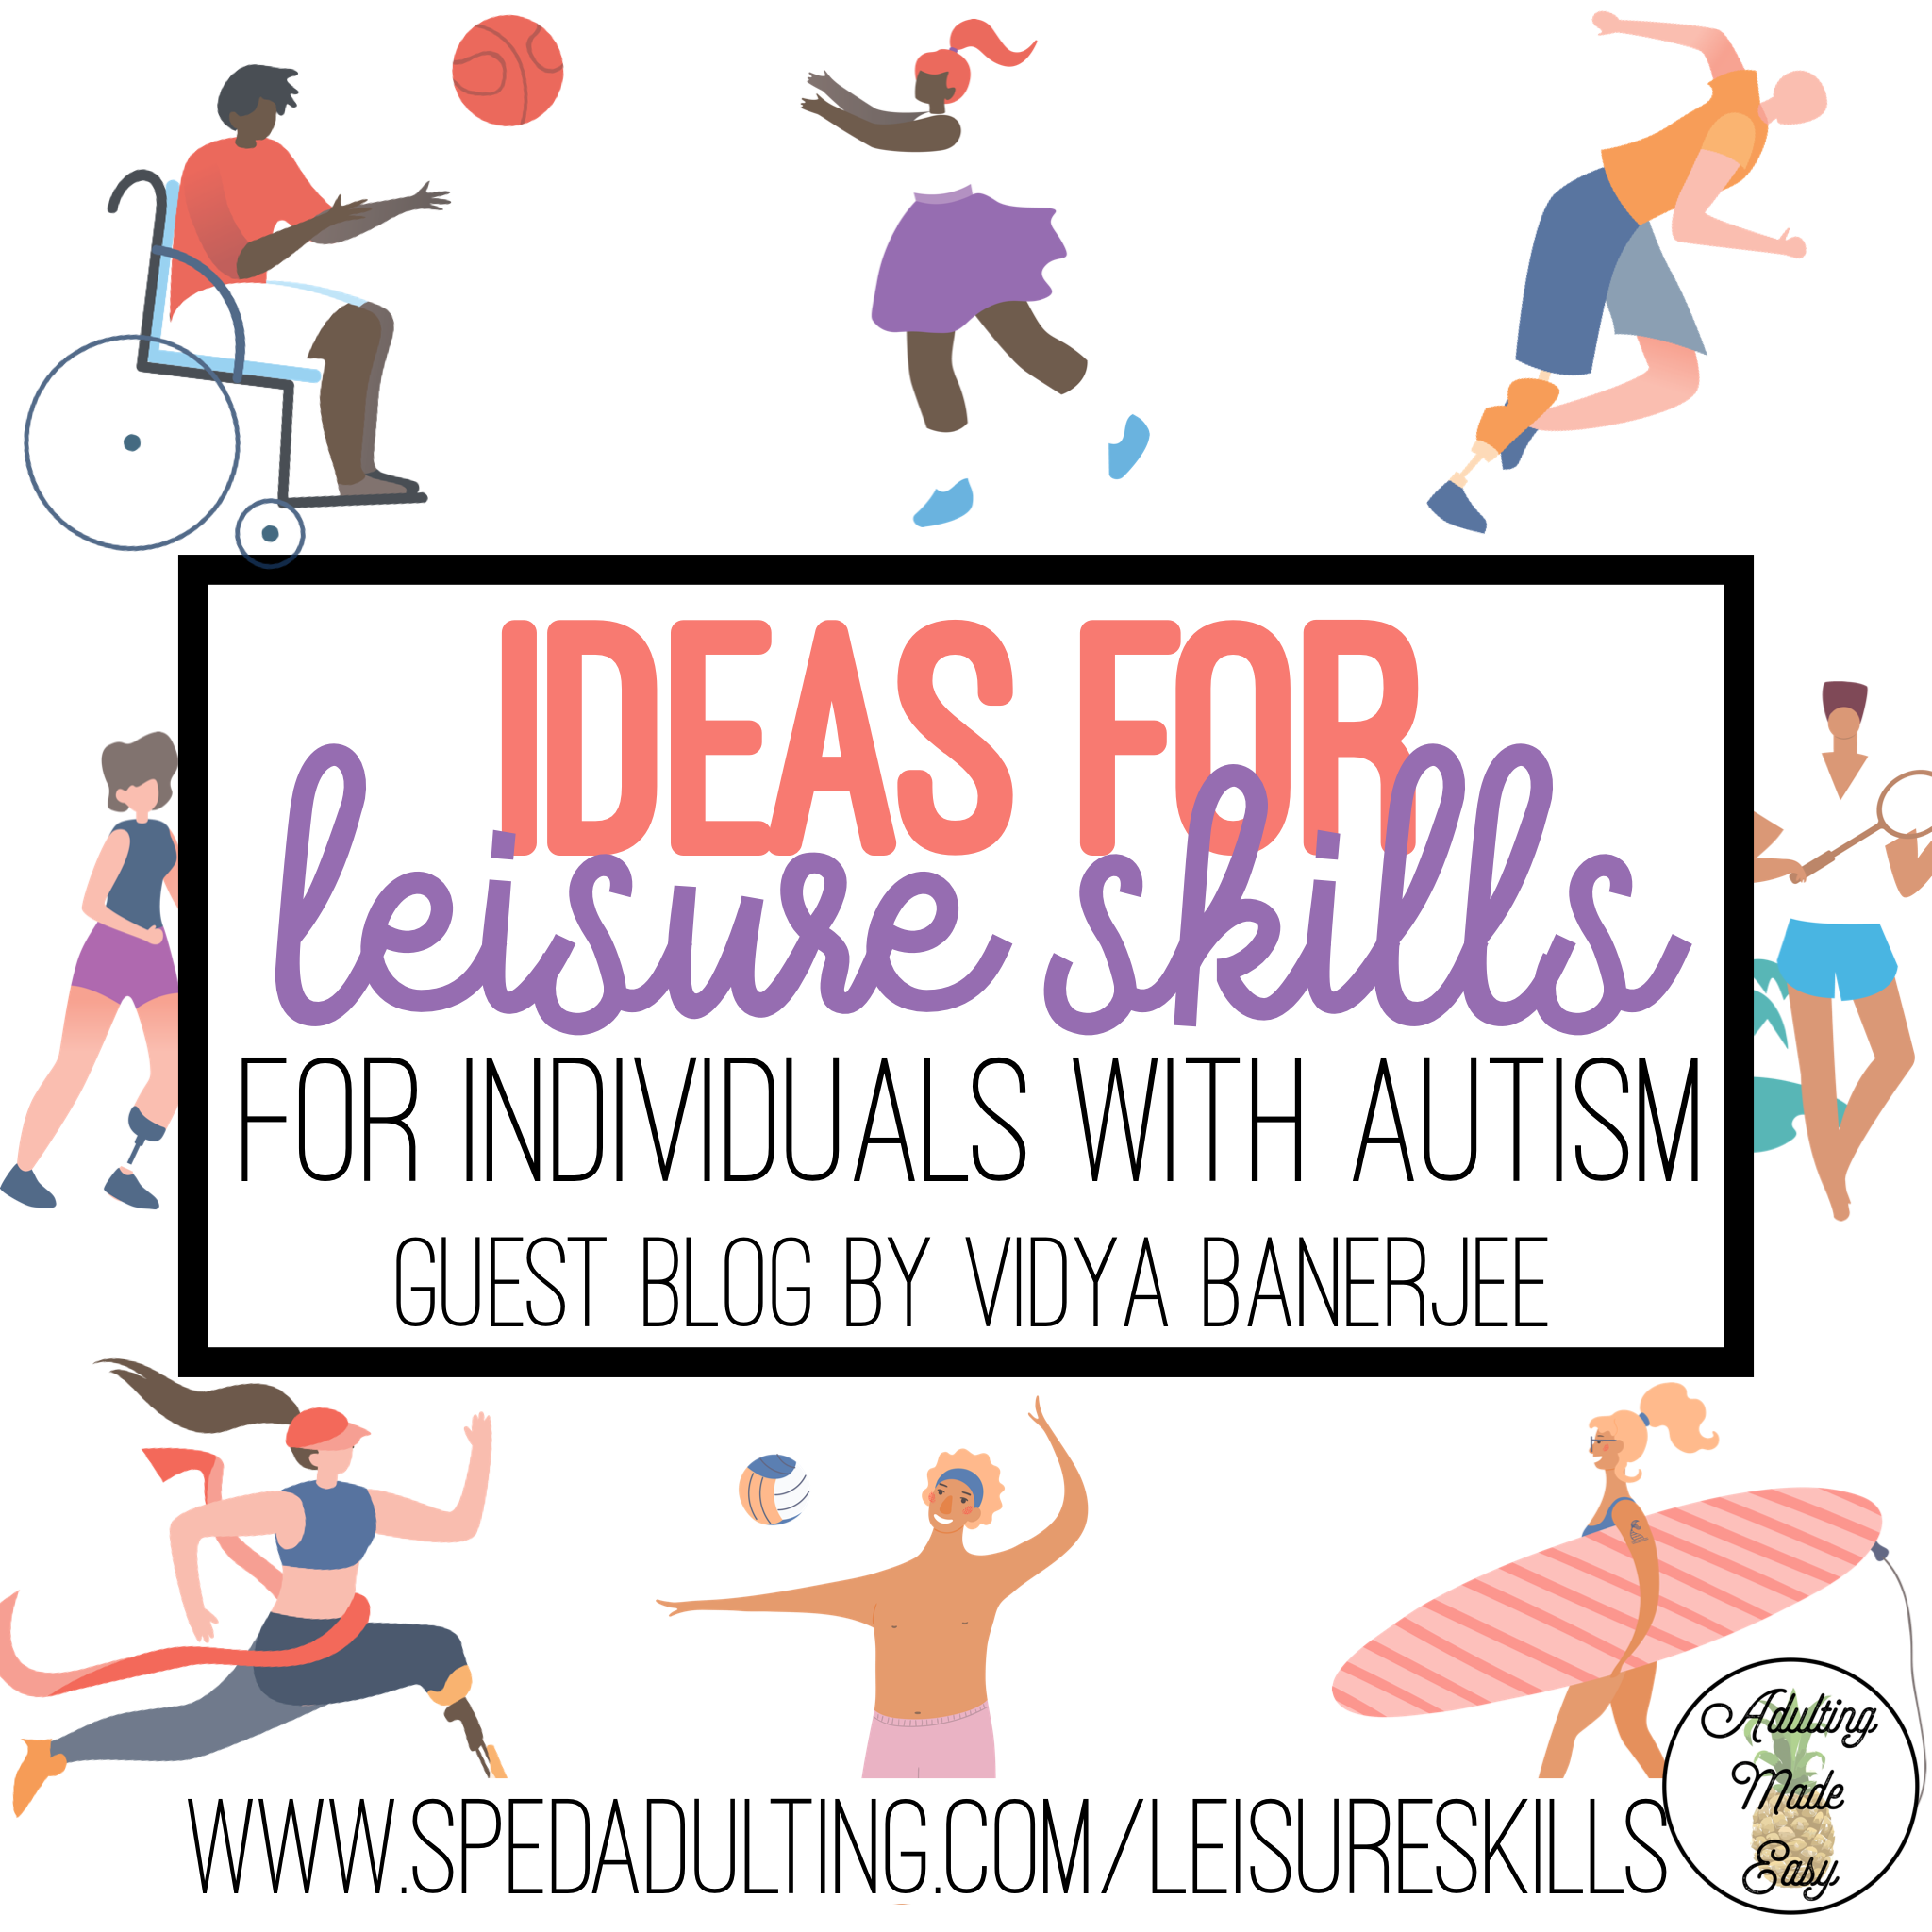 BLOG: Ideas for leisure skills for individuals with autism